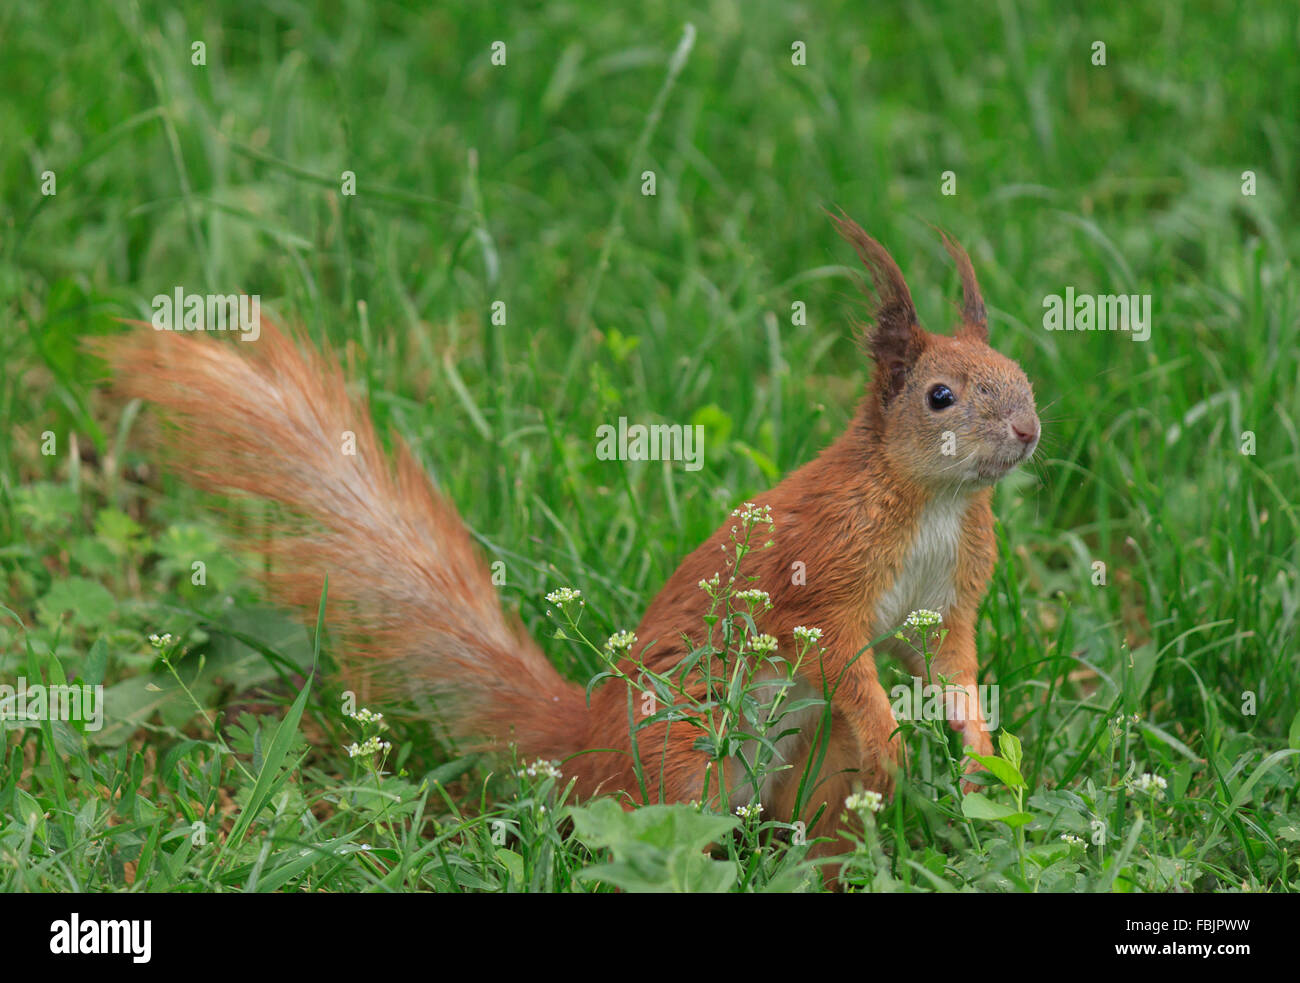 Close up of squirrel in Green grass Banque D'Images